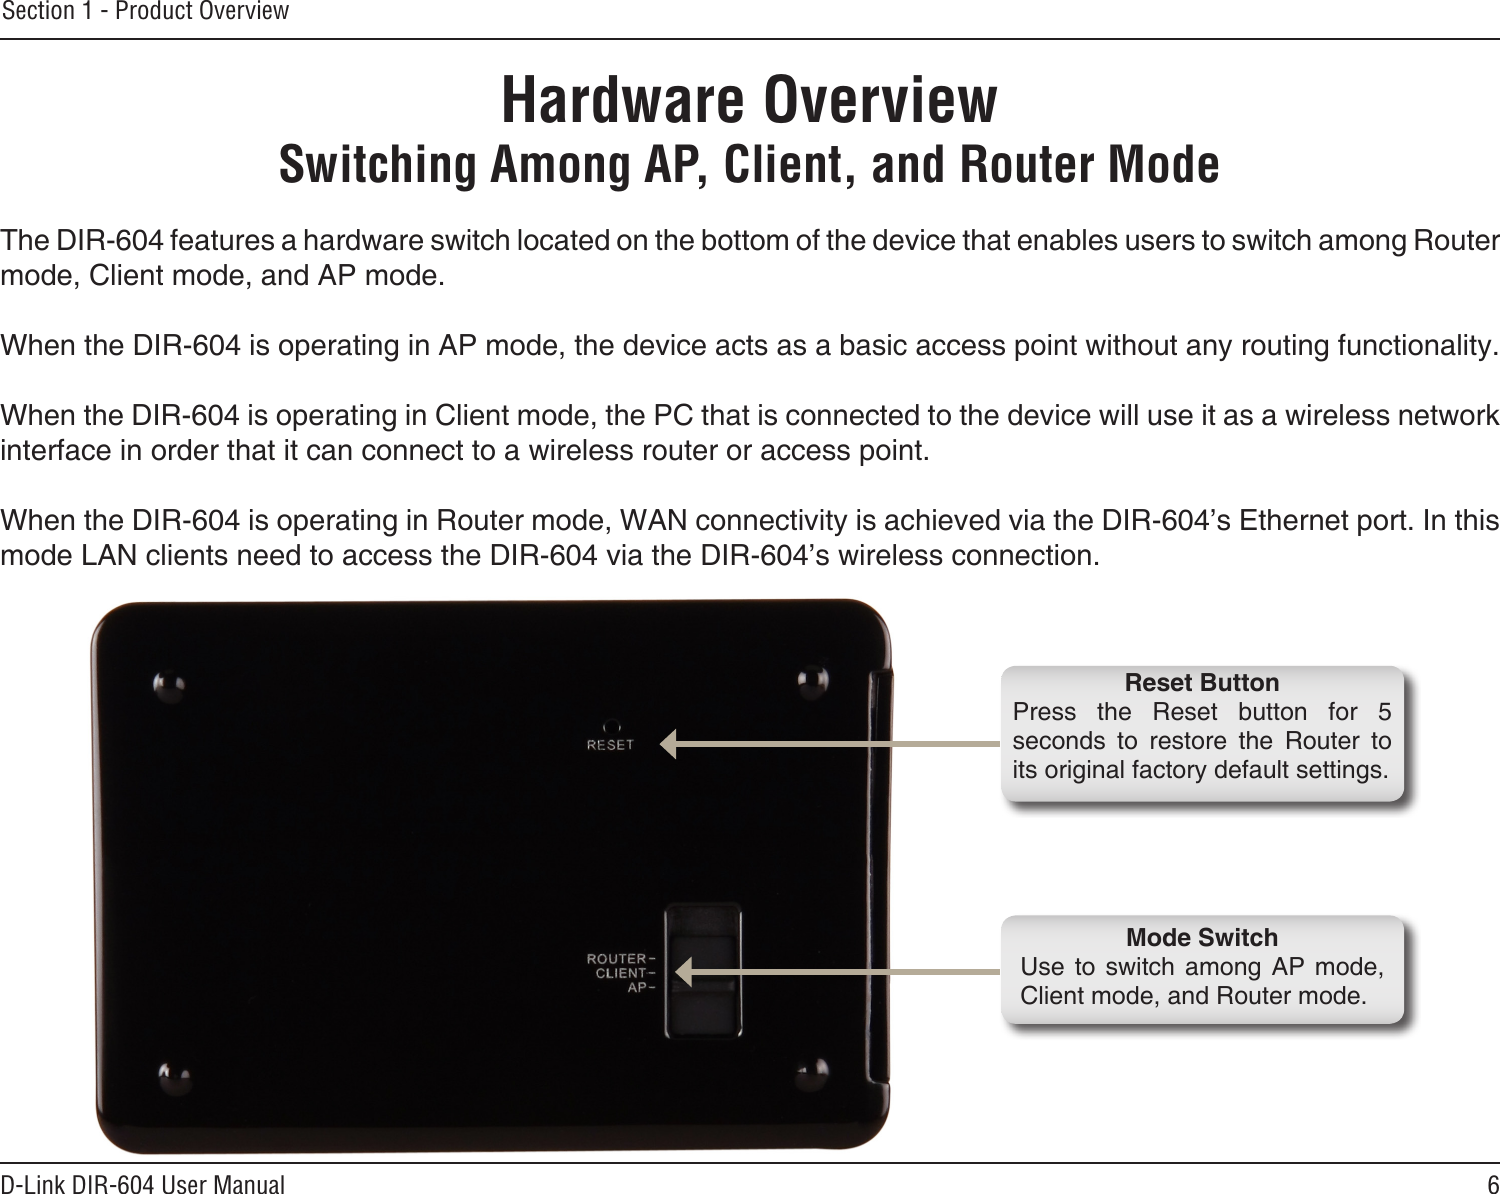 6D-Link DIR-604 User ManualSection 1 - Product OverviewHardware OverviewSwitching Among AP, Client, and Router ModeThe DIR-604 features a hardware switch located on the bottom of the device that enables users to switch among Router mode, Client mode, and AP mode. When the DIR-604 is operating in AP mode, the device acts as a basic access point without any routing functionality.When the DIR-604 is operating in Client mode, the PC that is connected to the device will use it as a wireless network interface in order that it can connect to a wireless router or access point.When the DIR-604 is operating in Router mode, WAN connectivity is achieved via the DIR-604’s Ethernet port. In this mode LAN clients need to access the DIR-604 via the DIR-604’s wireless connection.Mode SwitchUse  to  switch  among  AP  mode, Client mode, and Router mode.Reset ButtonPress  the  Reset  button  for  5 seconds  to  restore  the  Router  to its original factory default settings.